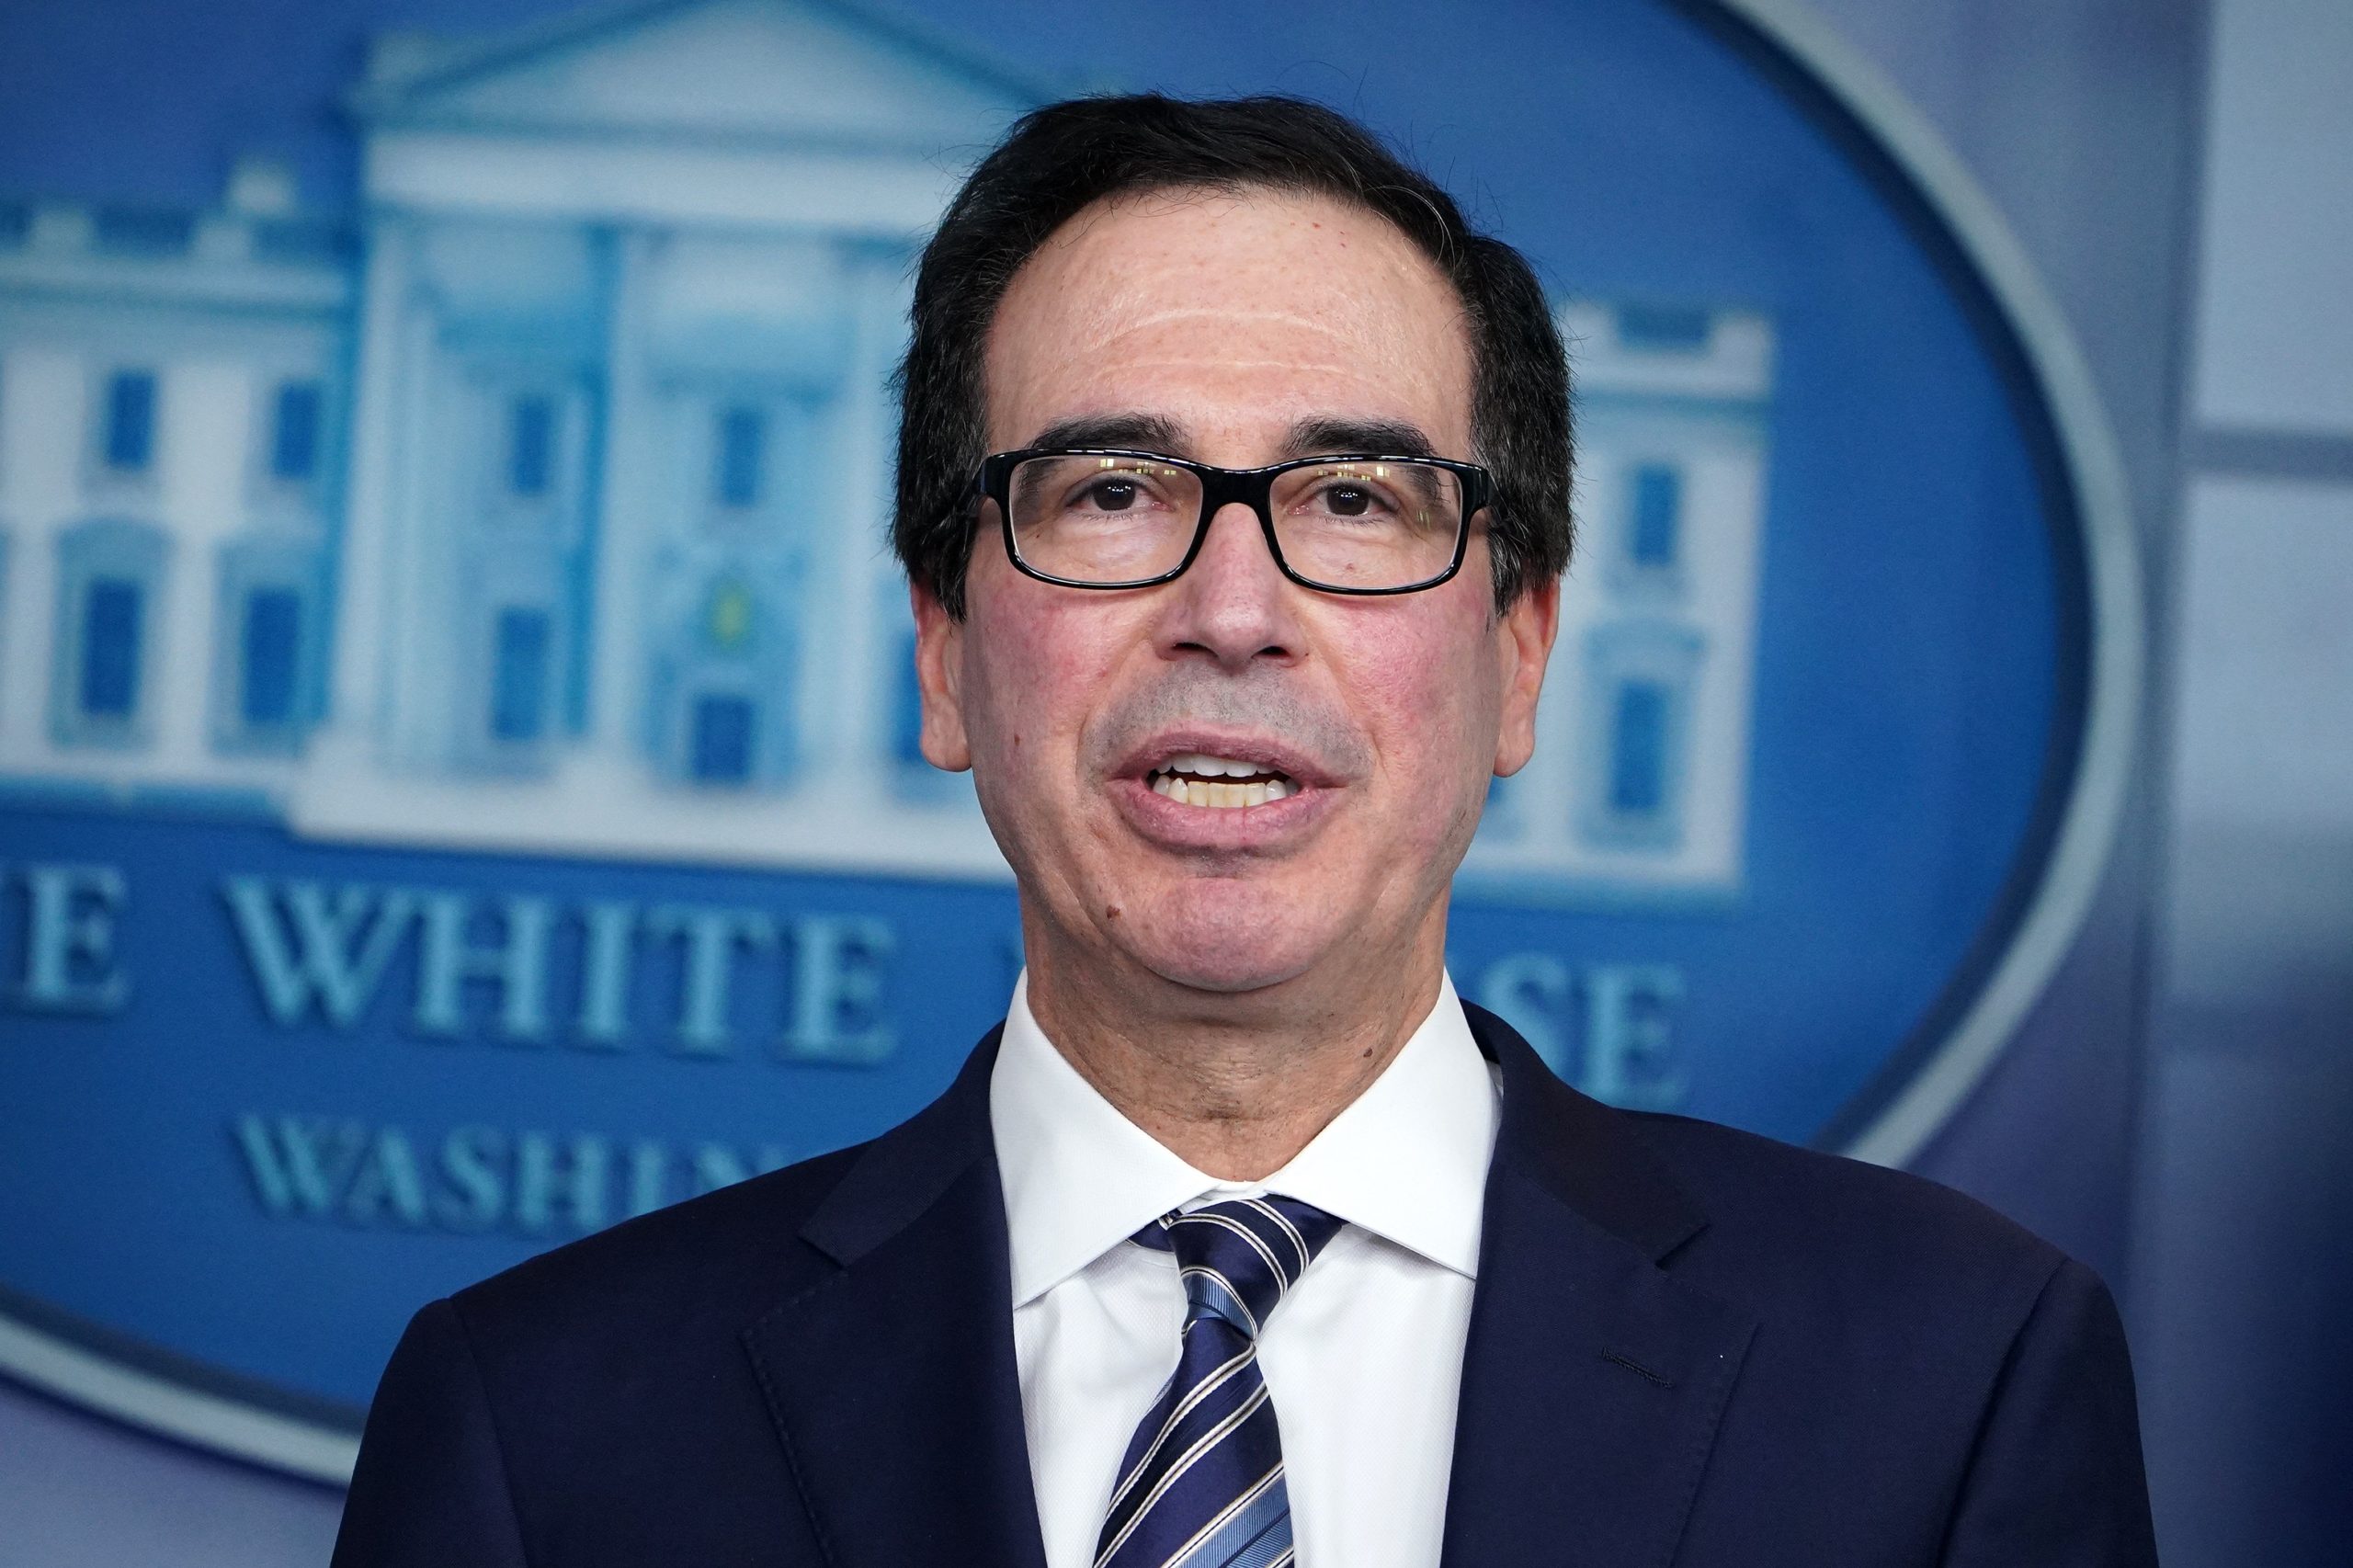 Small business loans above $2 million will get full audit to make sure they’re valid, Mnuchin says- oil and gas 360